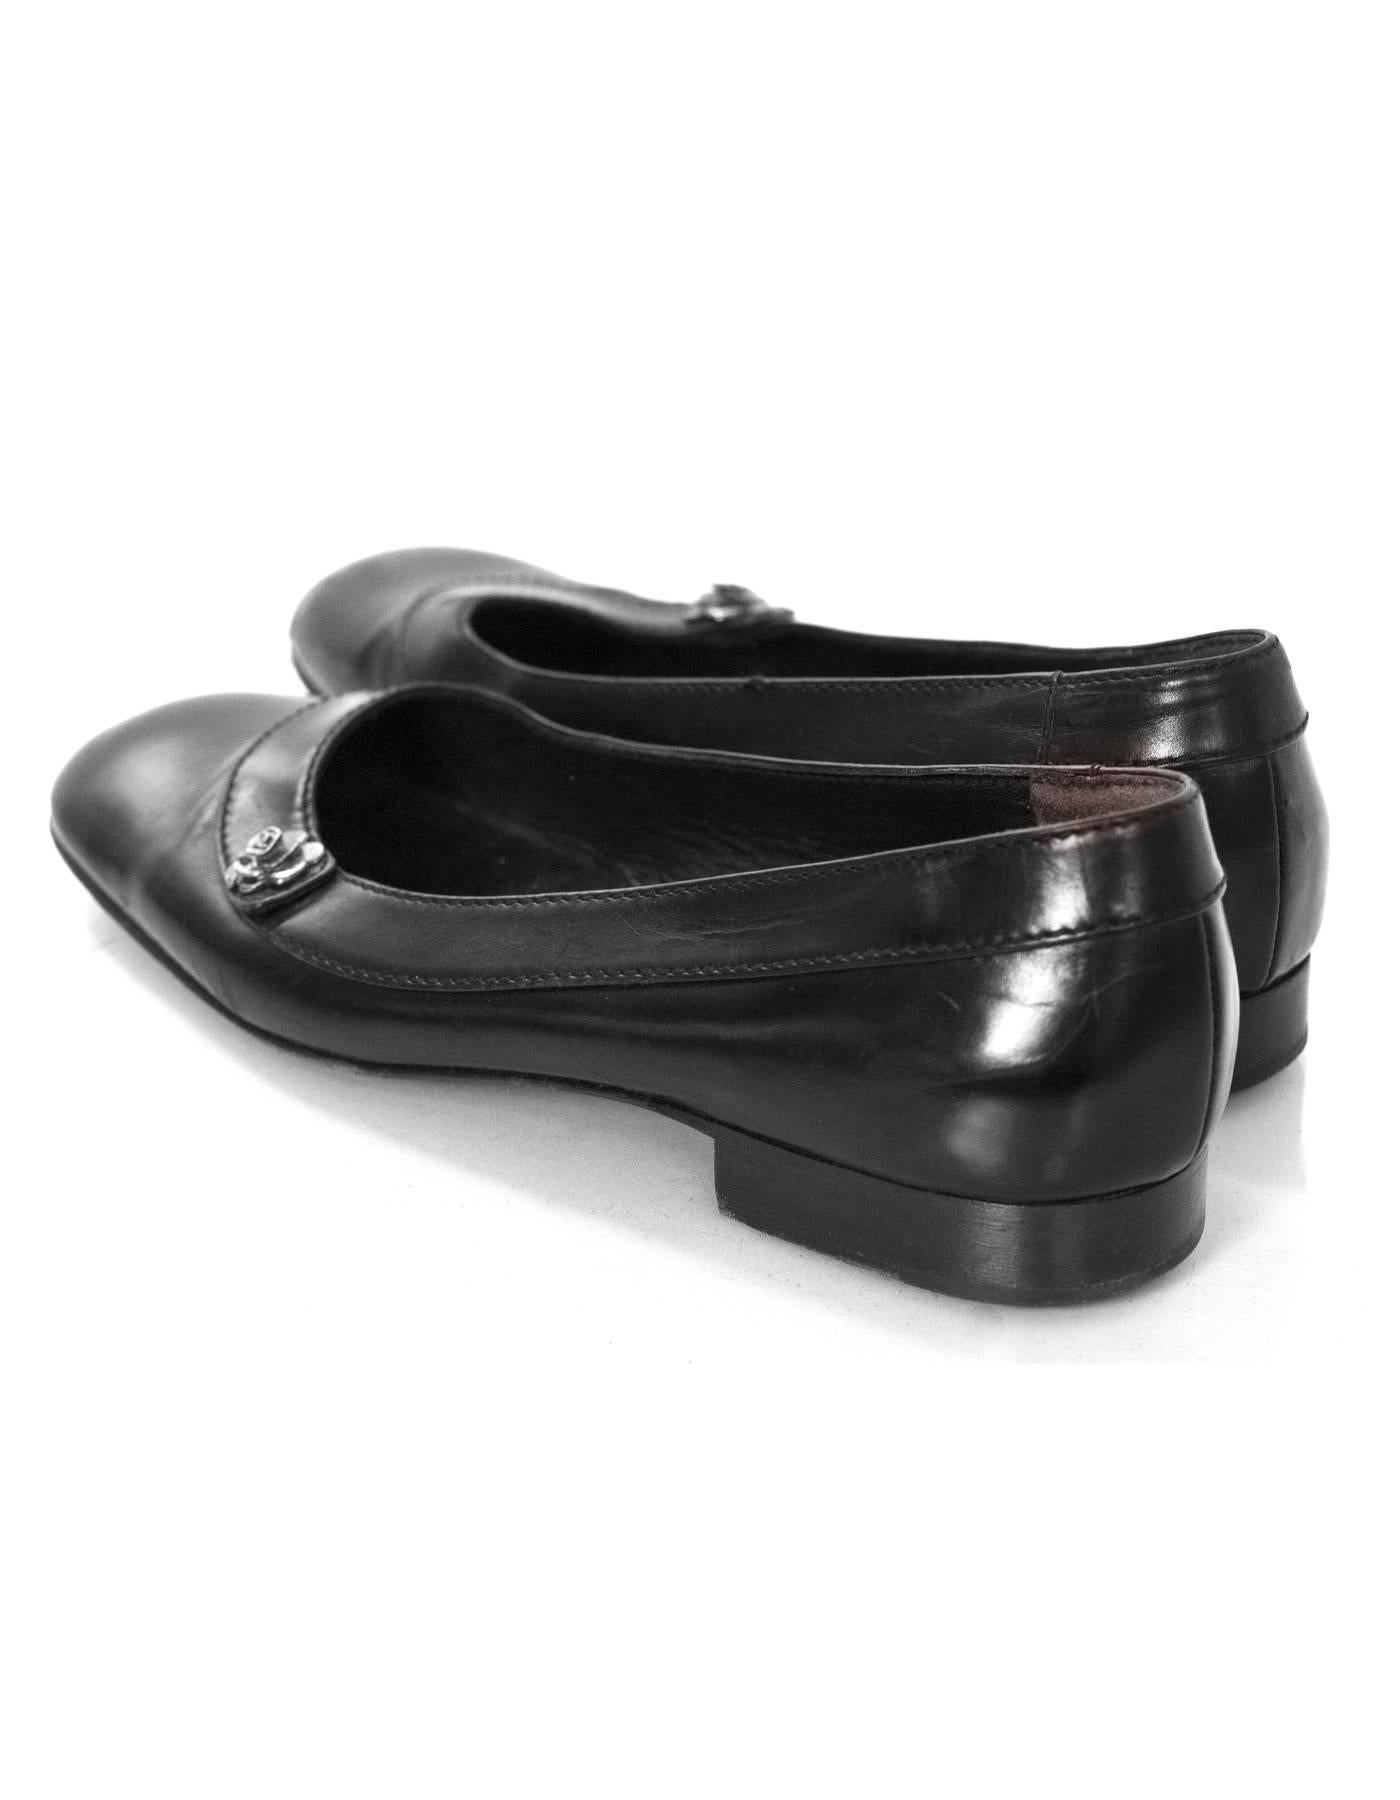 Women's Chanel Black Leather Flats with Camellia Flower Sz 36.5